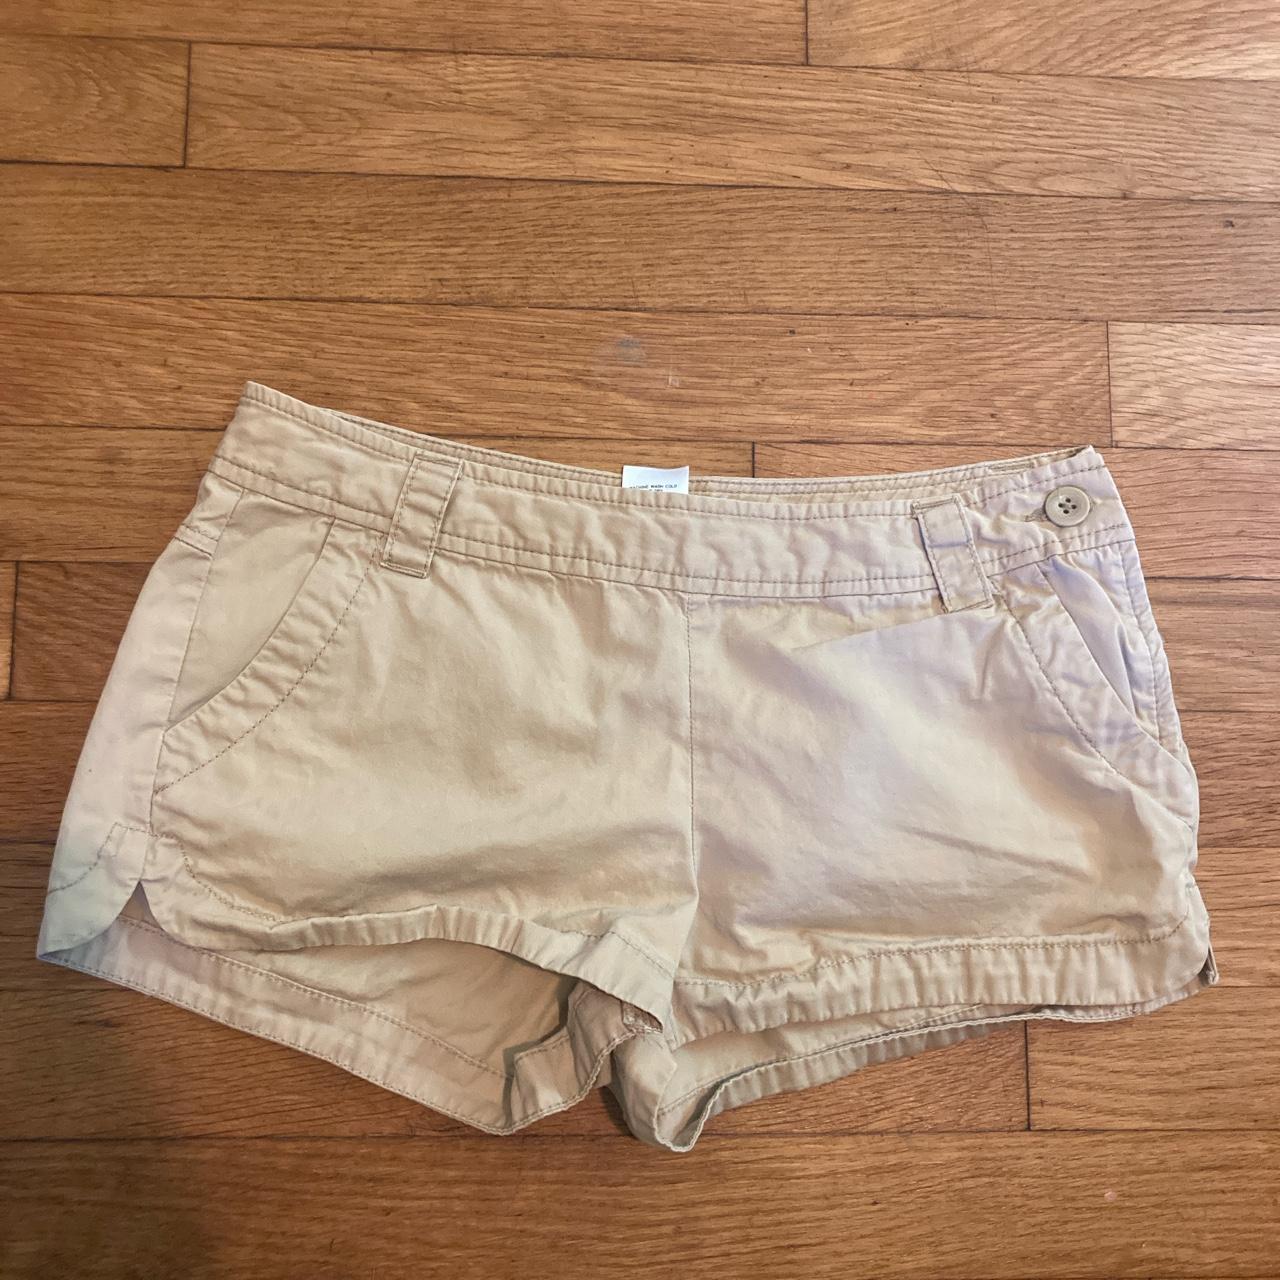 Y2K inspired cargo shorts from Old Navy. Has never... - Depop